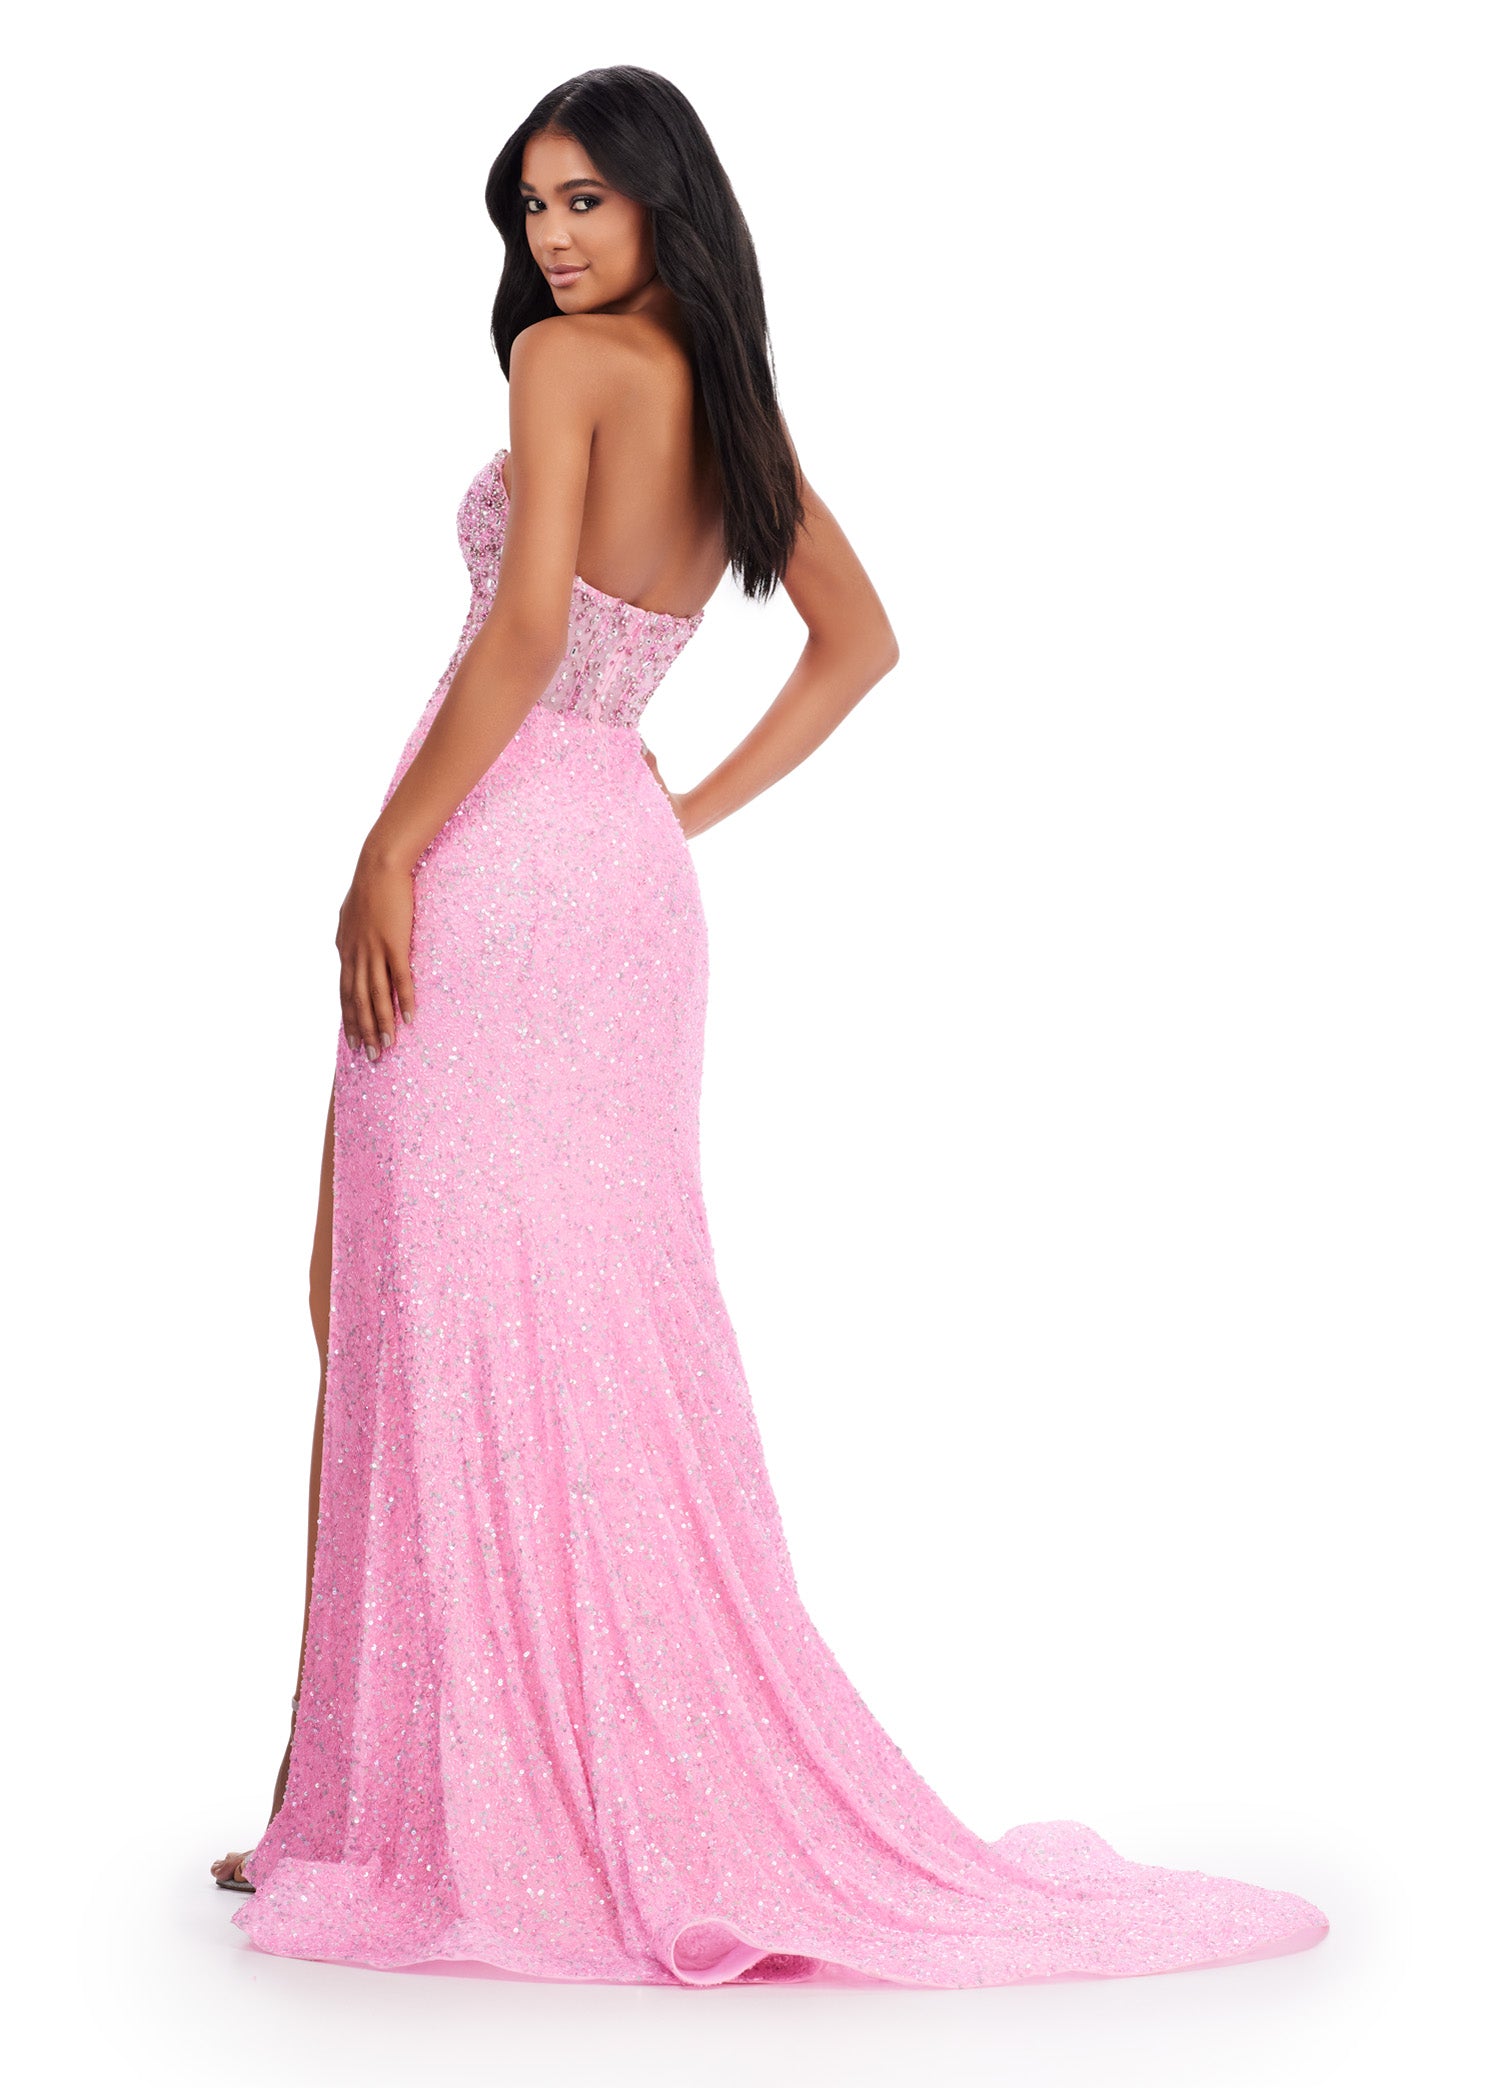 Elevate your formal look with the Ashley Lauren 11648 Long Prom Dress. Stunningly designed with a strapless, beaded corset bustier and a stylish slit, this gown exudes elegance and sophistication. Perfect for pageants and prom, it's sure to make a lasting impression. A fully beaded gown sure to make you feel like a queen! This dress features an illusion corset bustier and left leg slit.